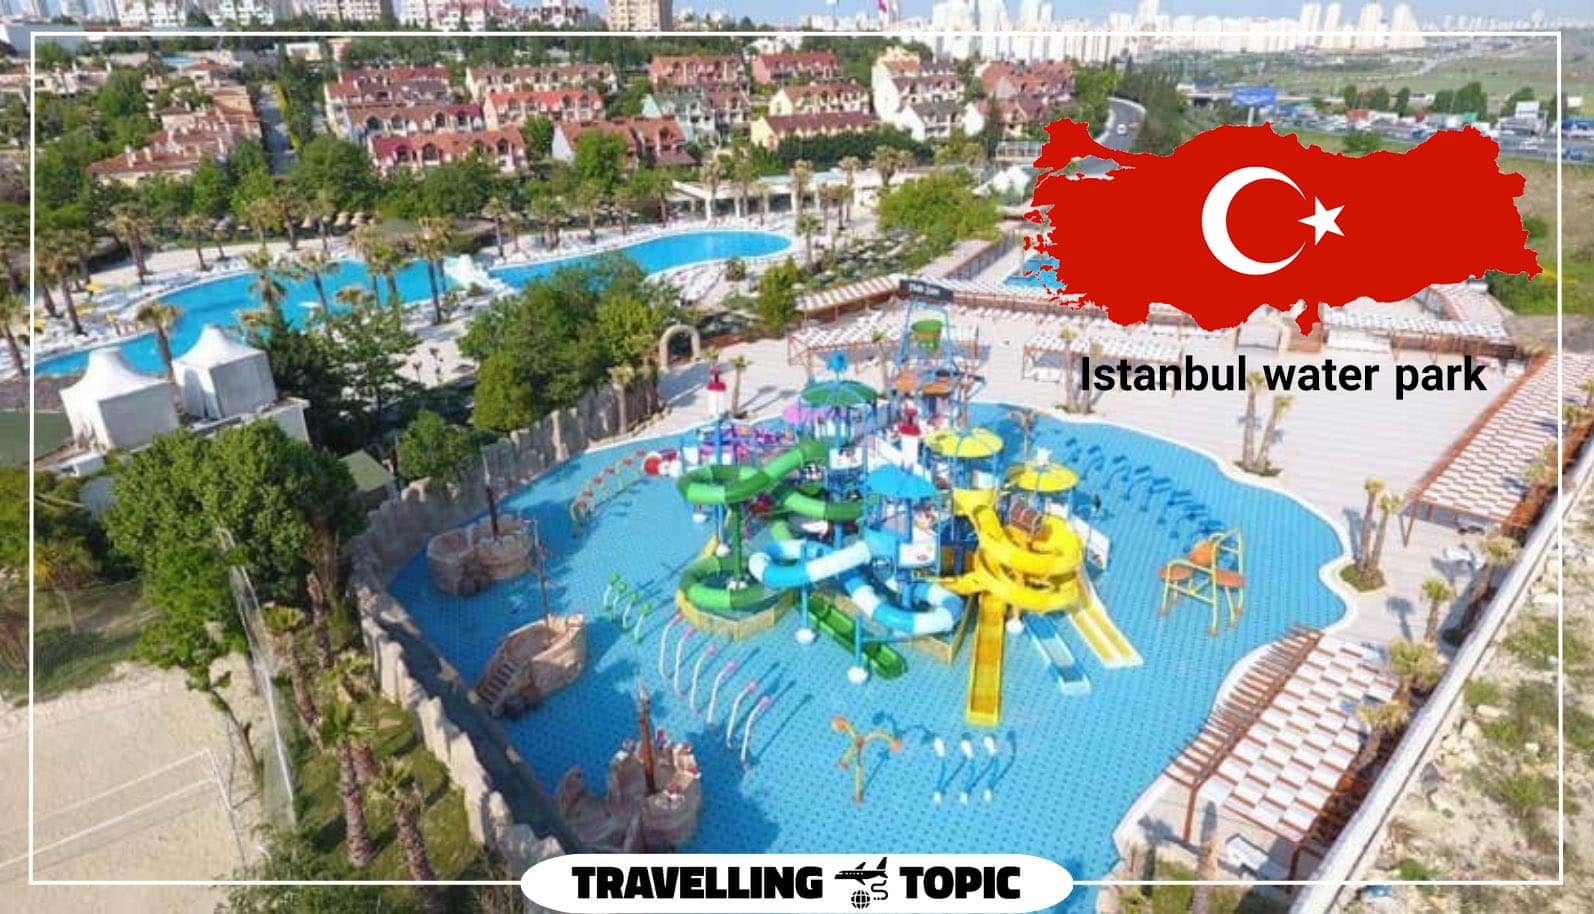 Istanbul Dolphin Club water park